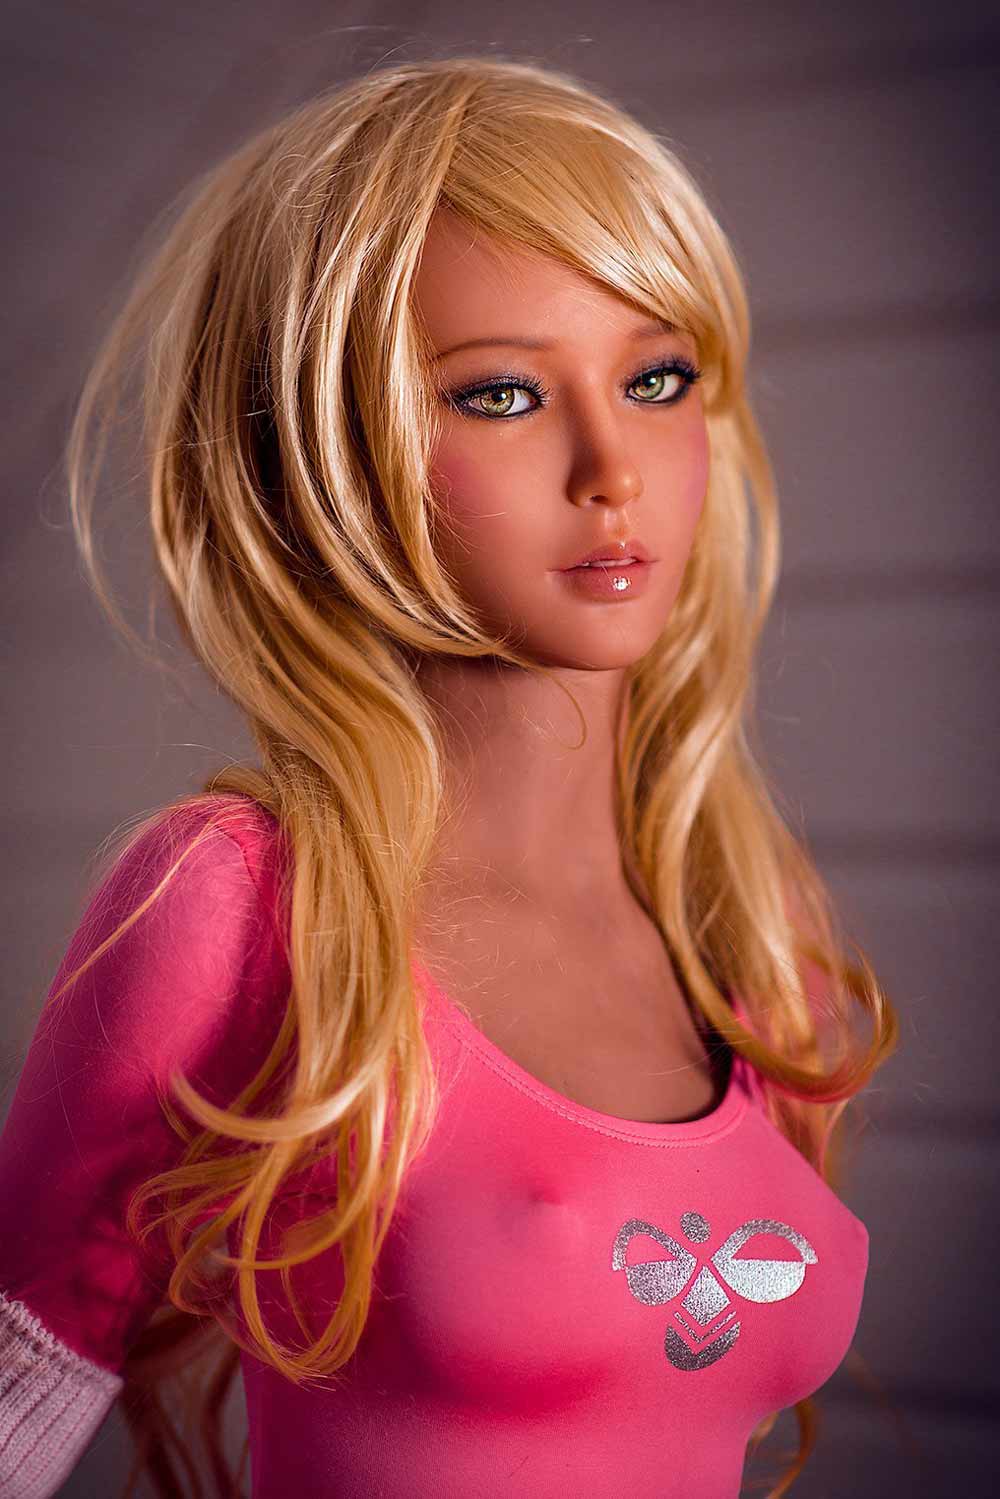 Sex doll in pink top